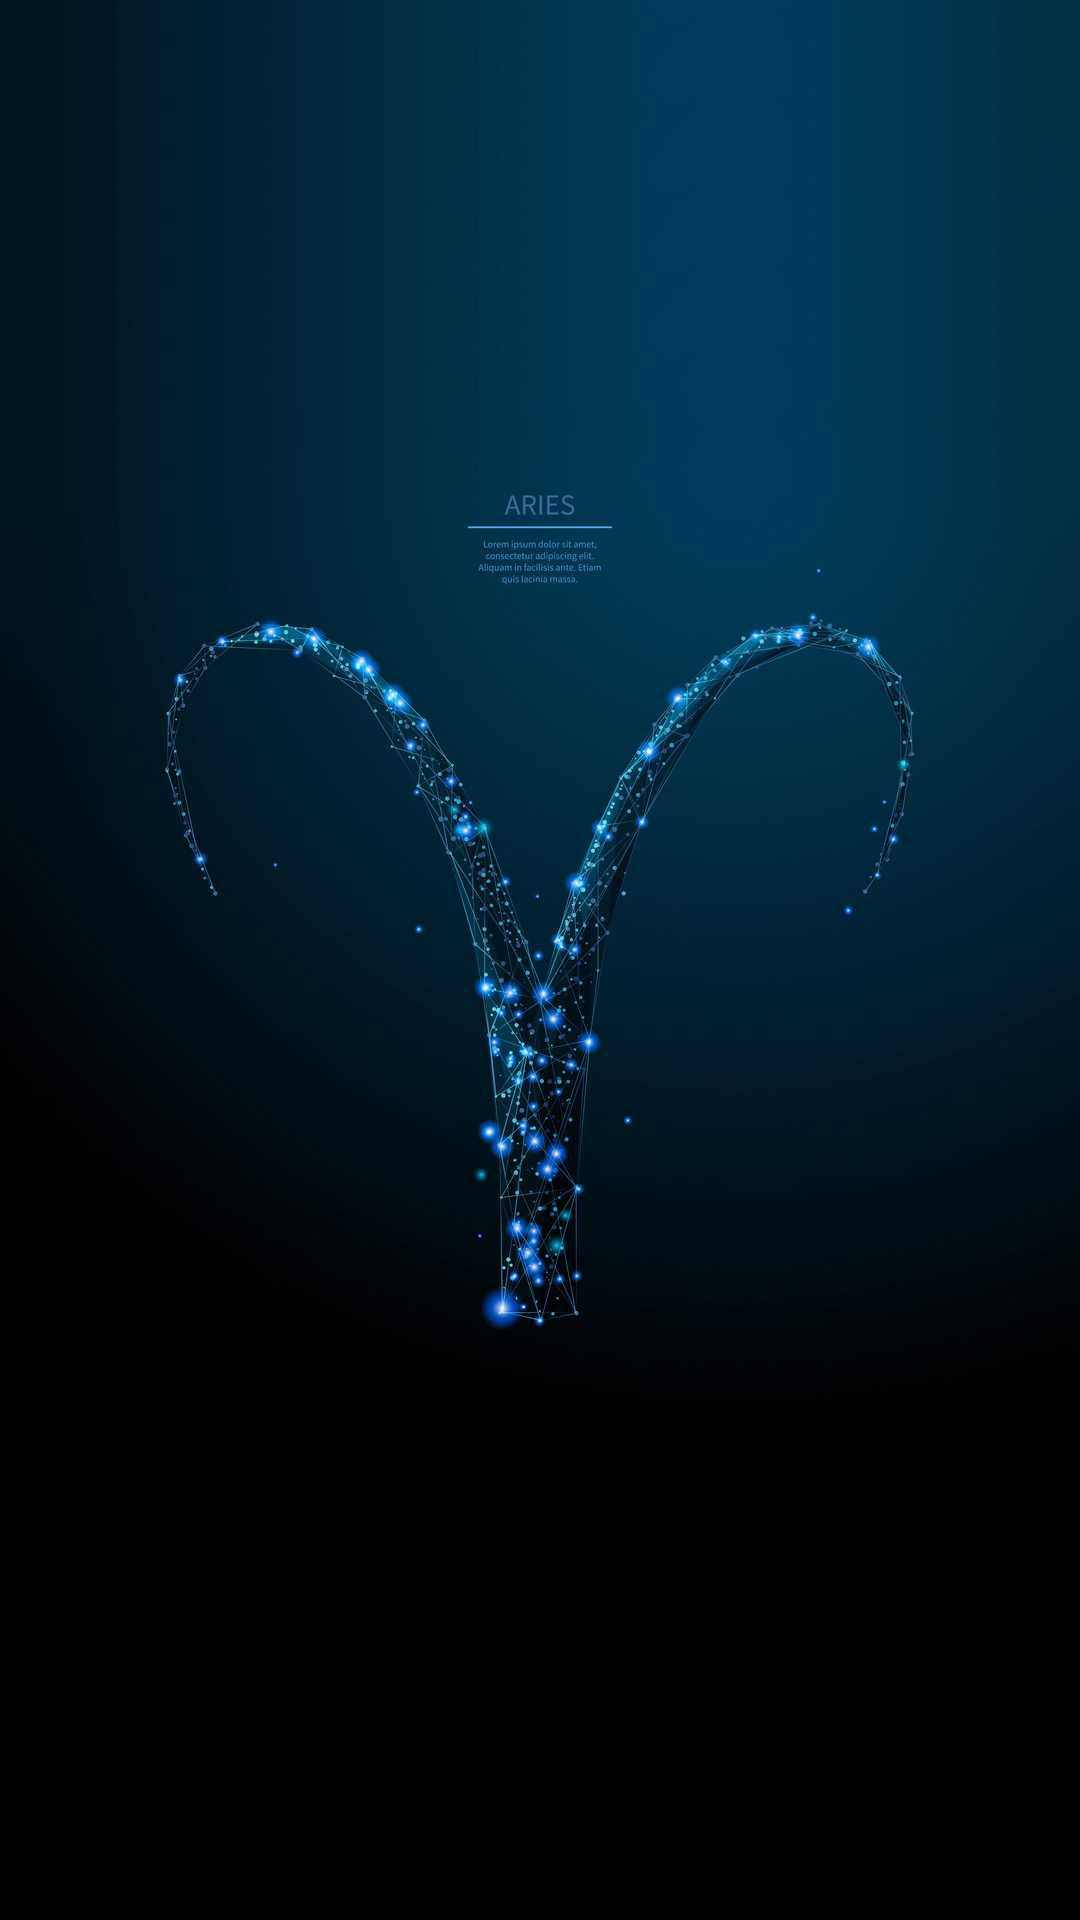 Blue Sparkly Aries Aesthetic Zodiac Sign Wallpaper